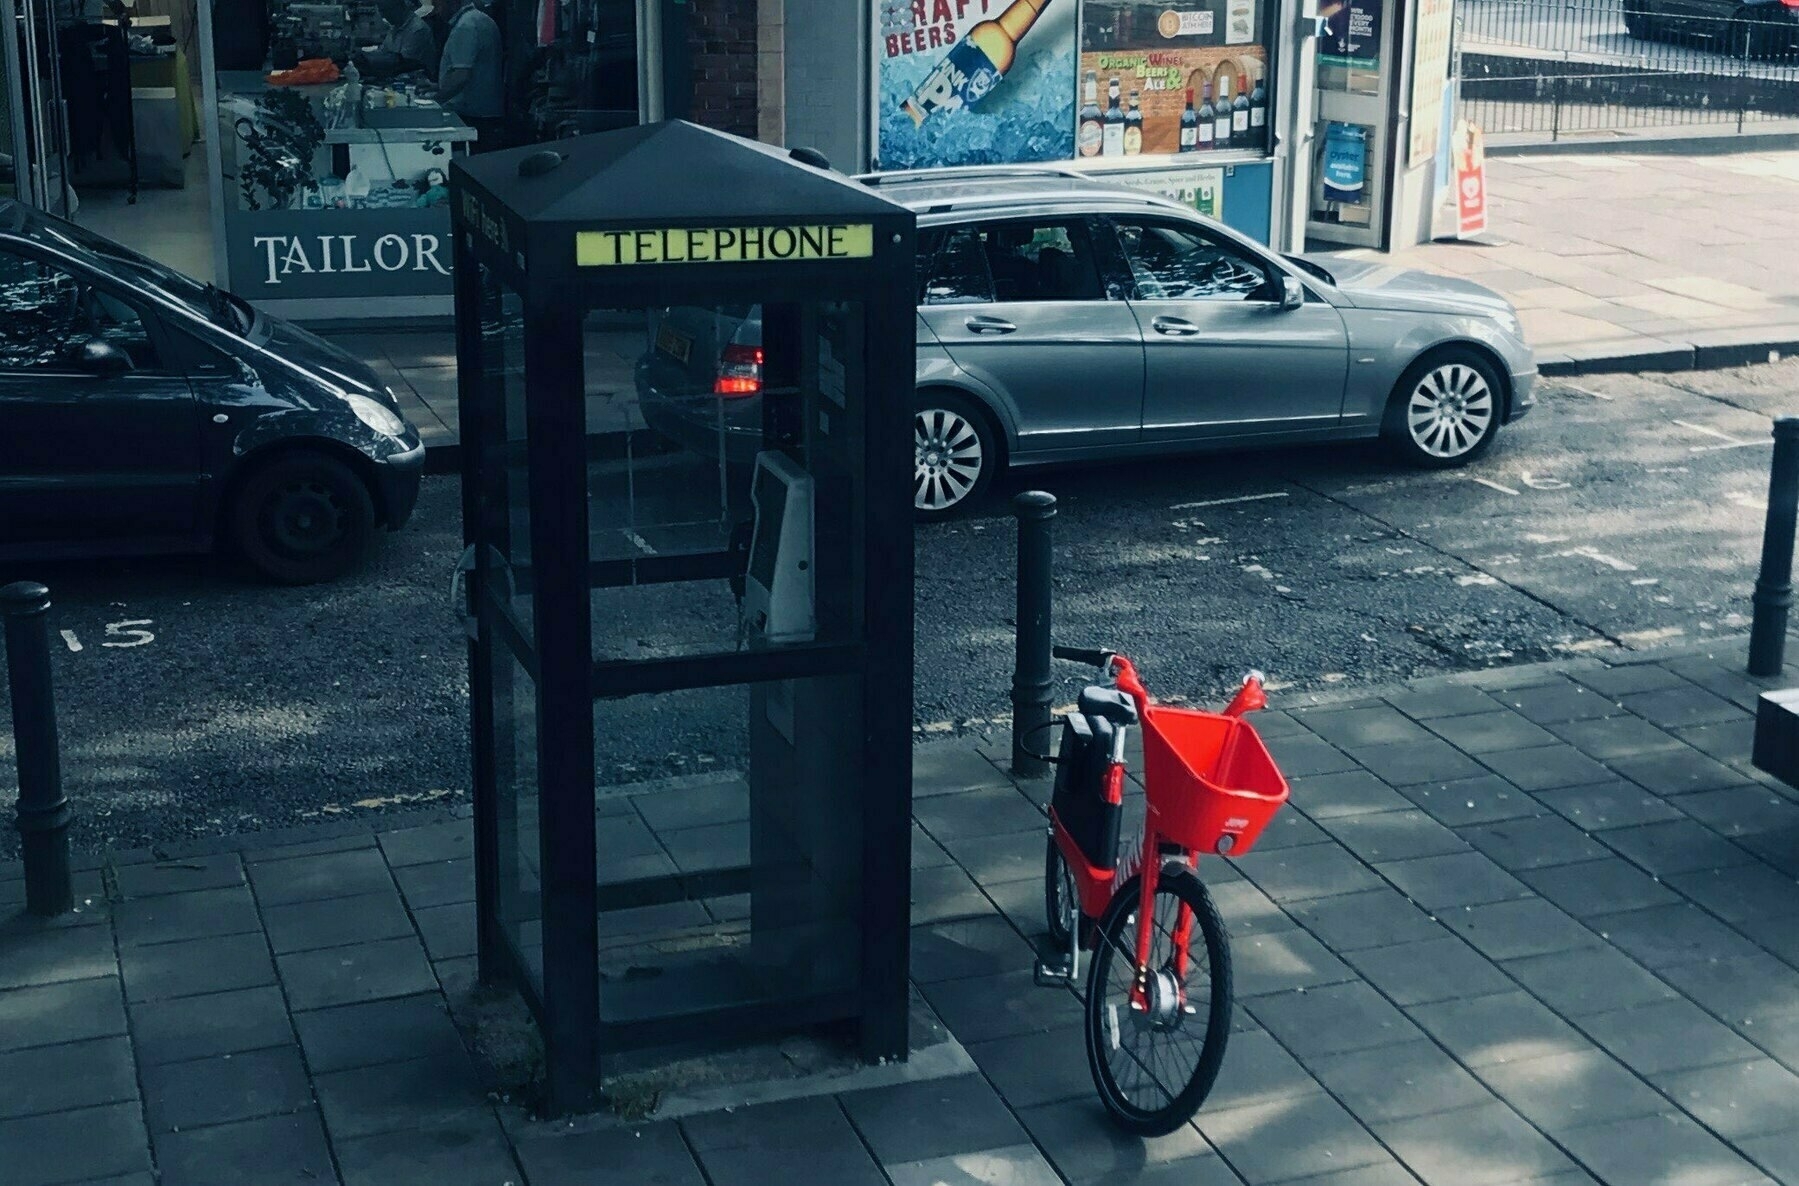 A bike with a bright red plastic front basket parked on a kickstand next a black telephone box on a London street